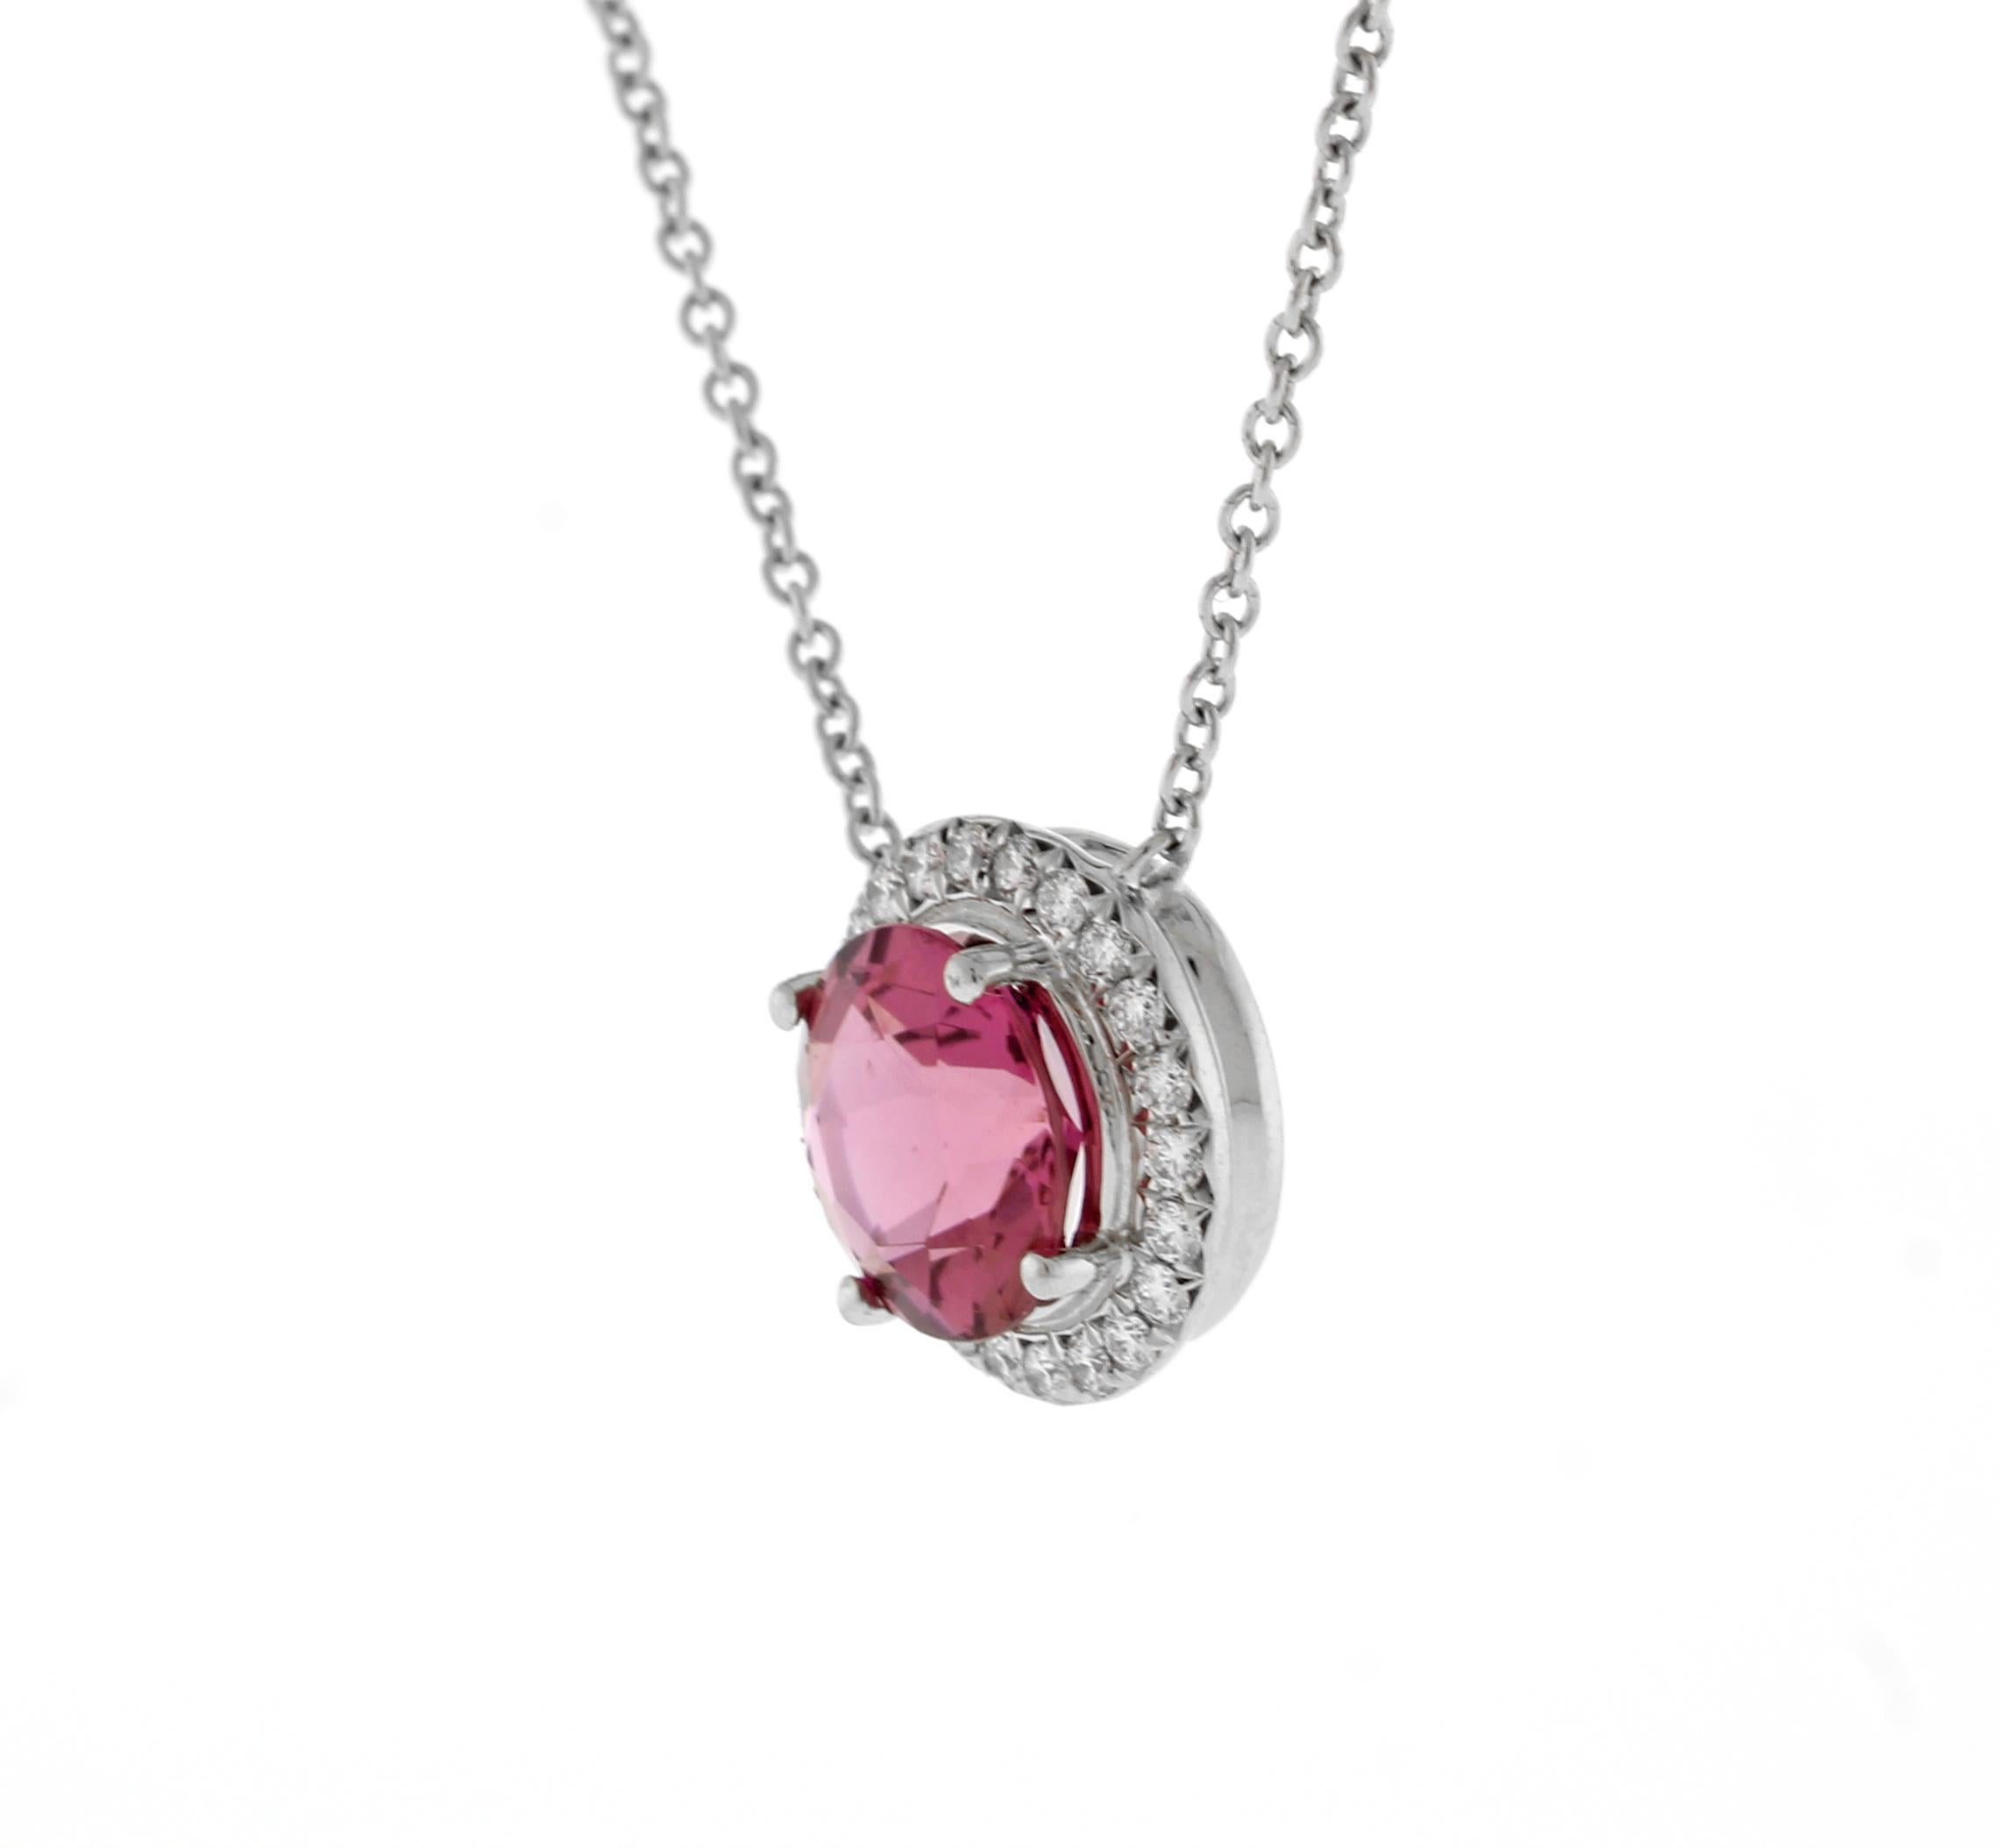 From Tiffany & Co.'s Soleste collection, Shimmering diamonds surround an intensely colored pink Tourmaline.
Platinum Pendant with a 7.5mm pink Tourmaline and a row of round brilliant diamonds. (Large size)
♦ Designer: Tiffany & Co.
♦ Metal: